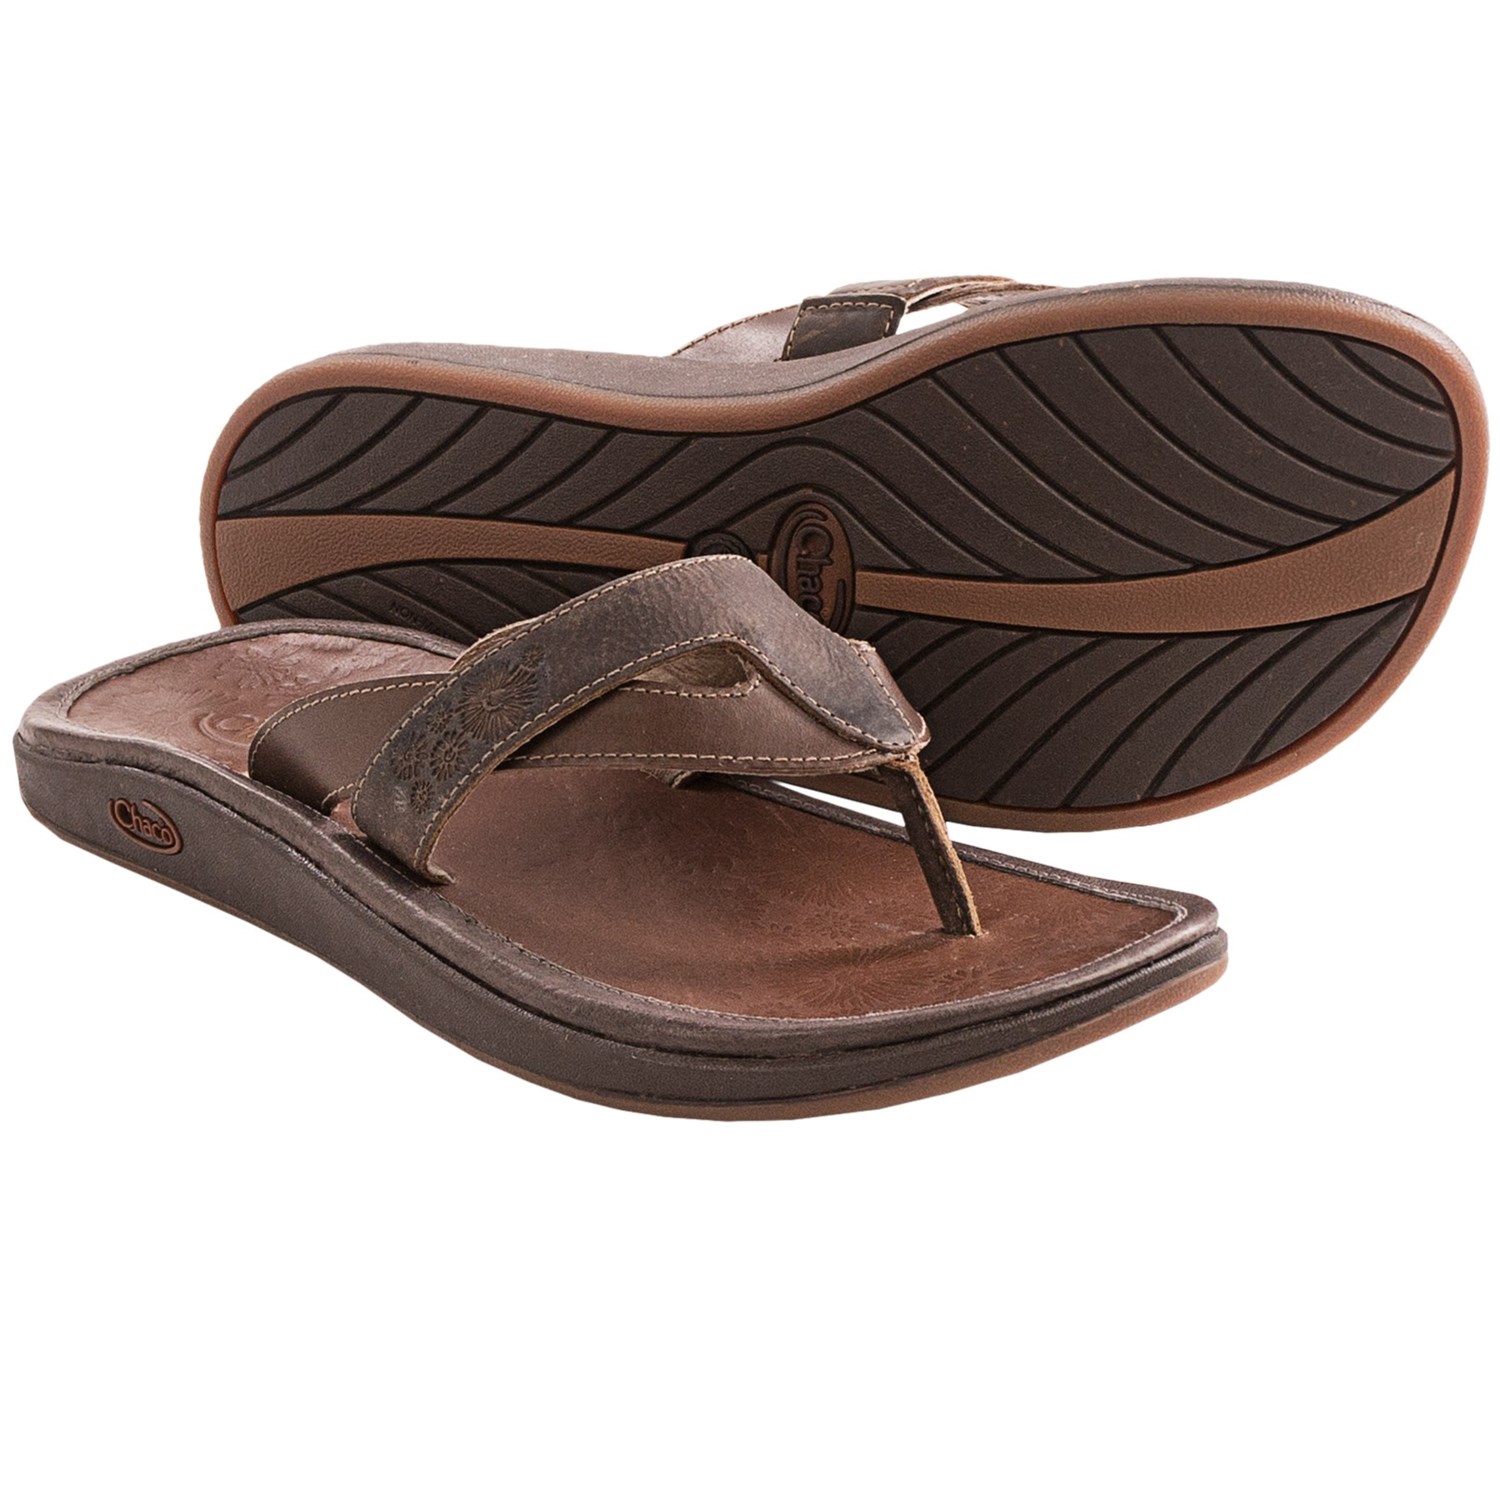 Where can i buy chaco sandals â€“ Cheap shoes online